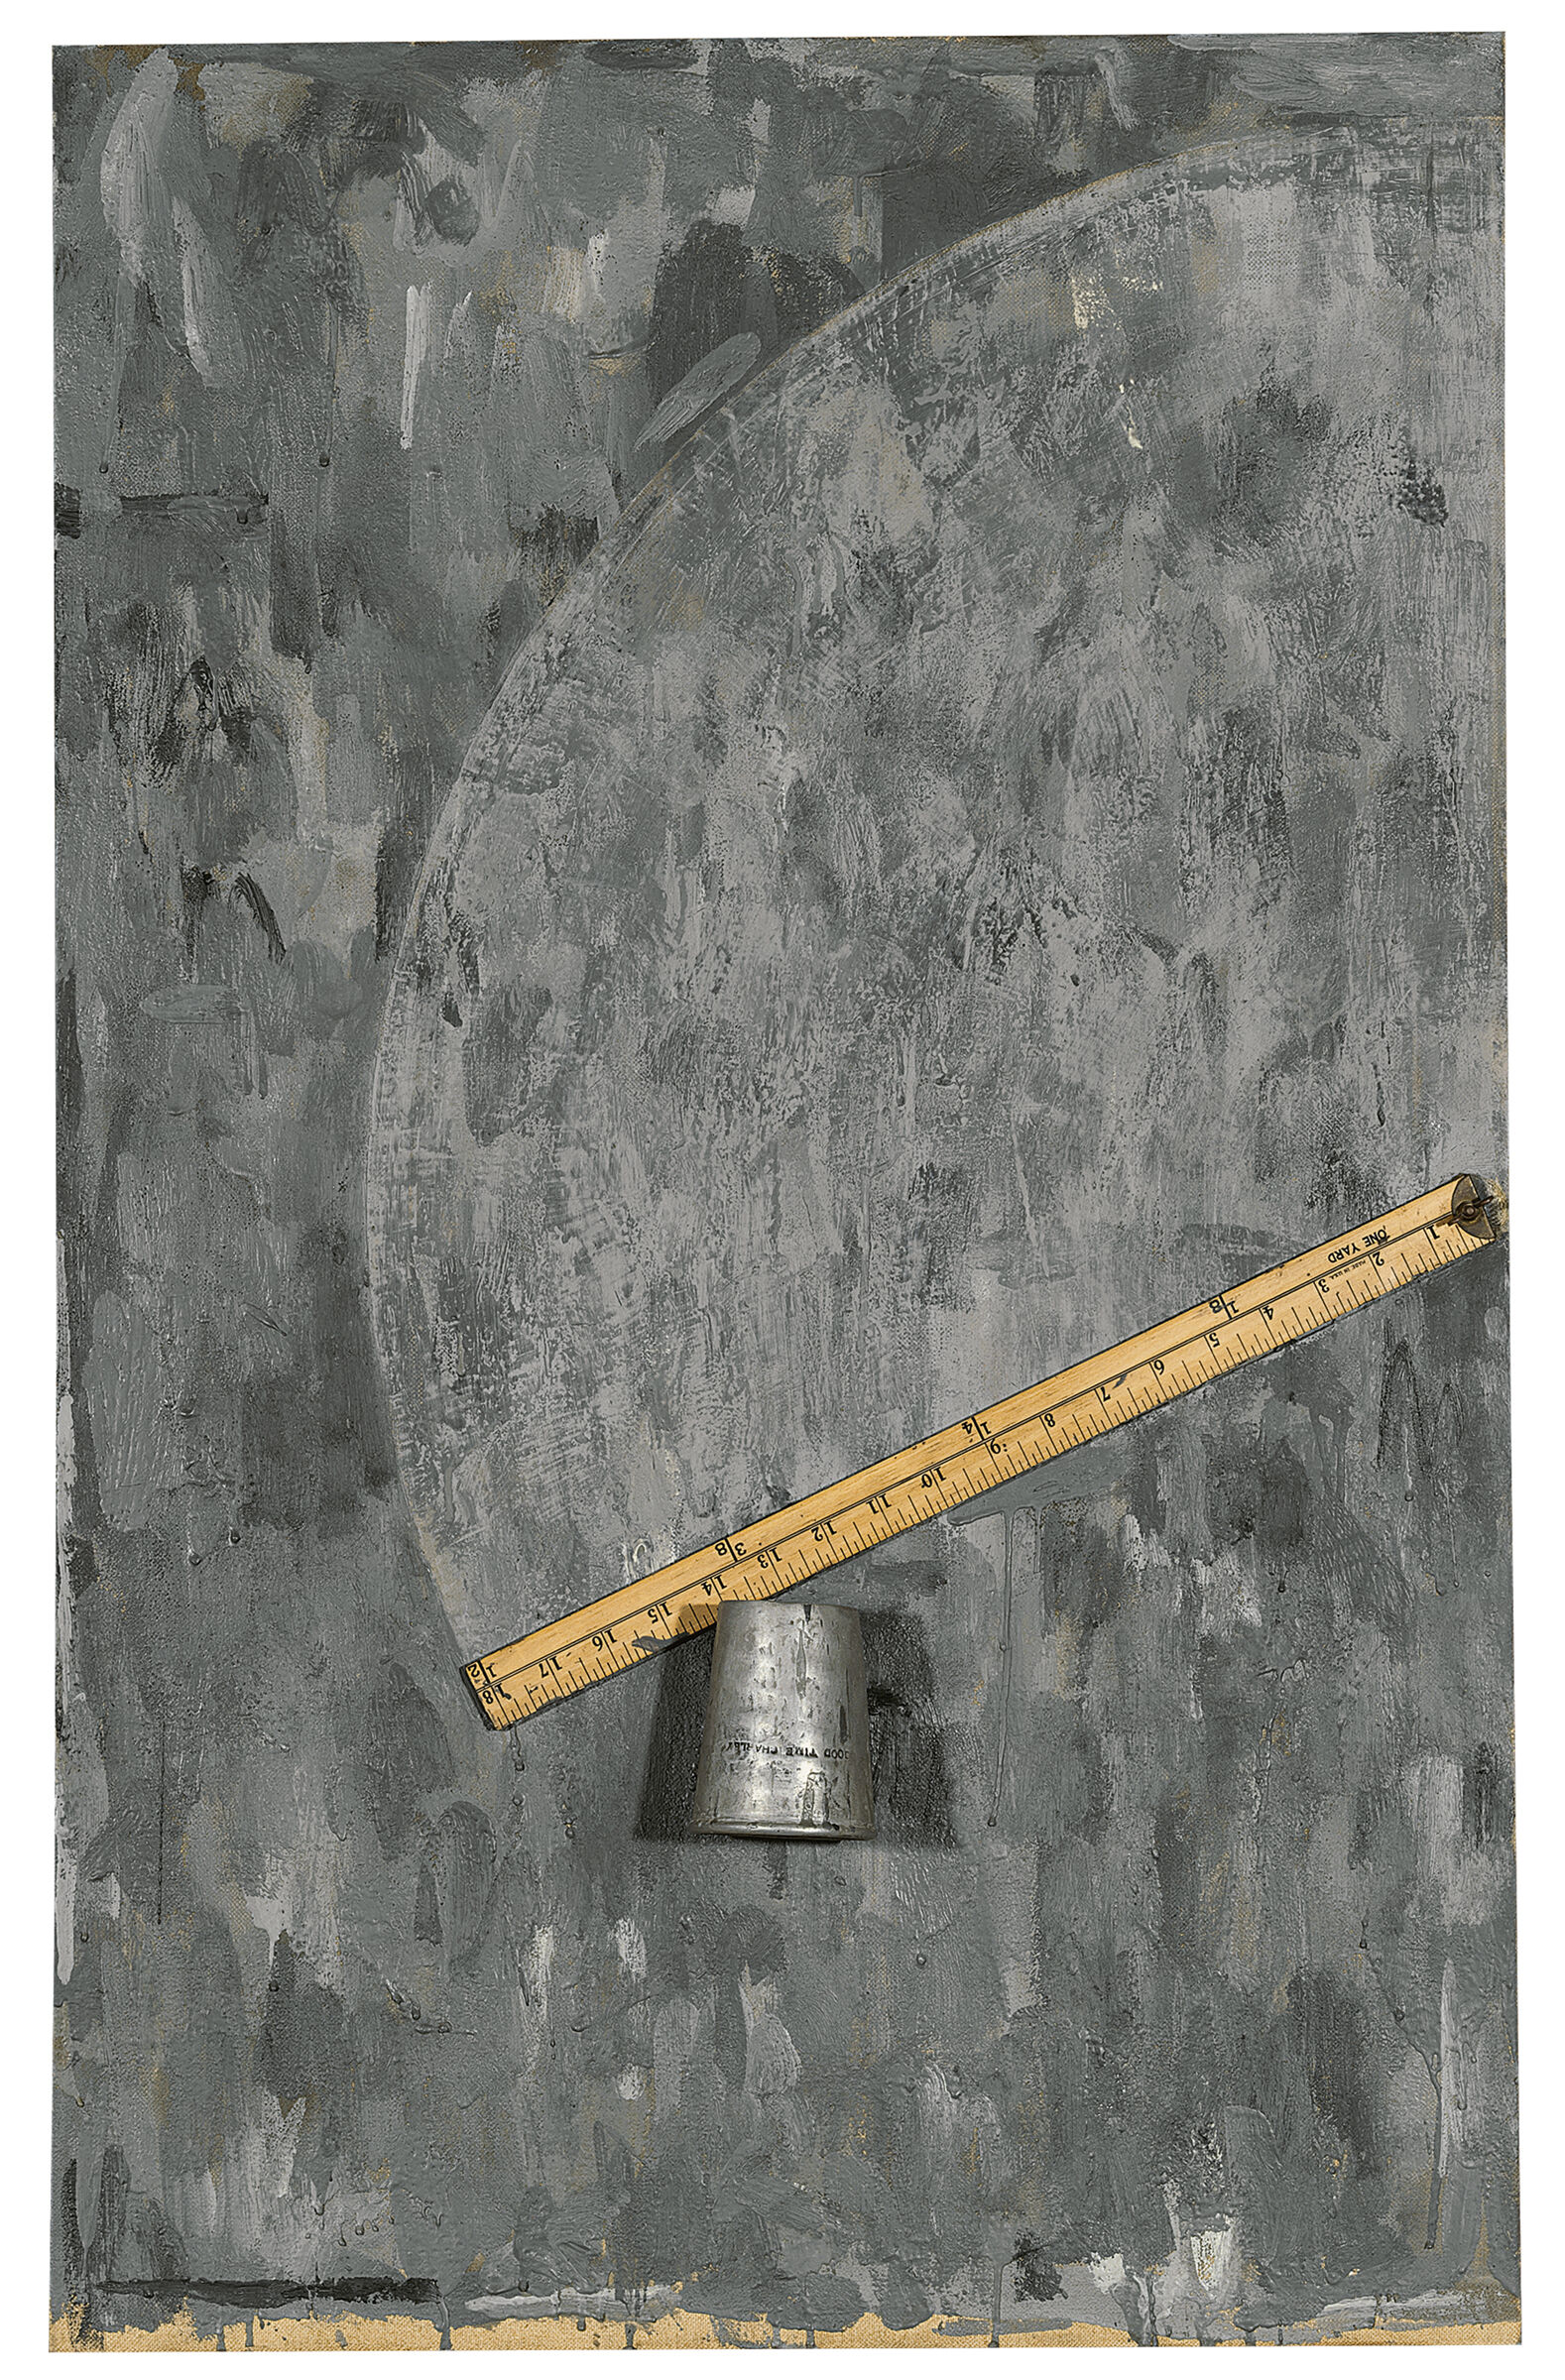 Tin cup and wooden ruler on a background of gray brushstrokes.